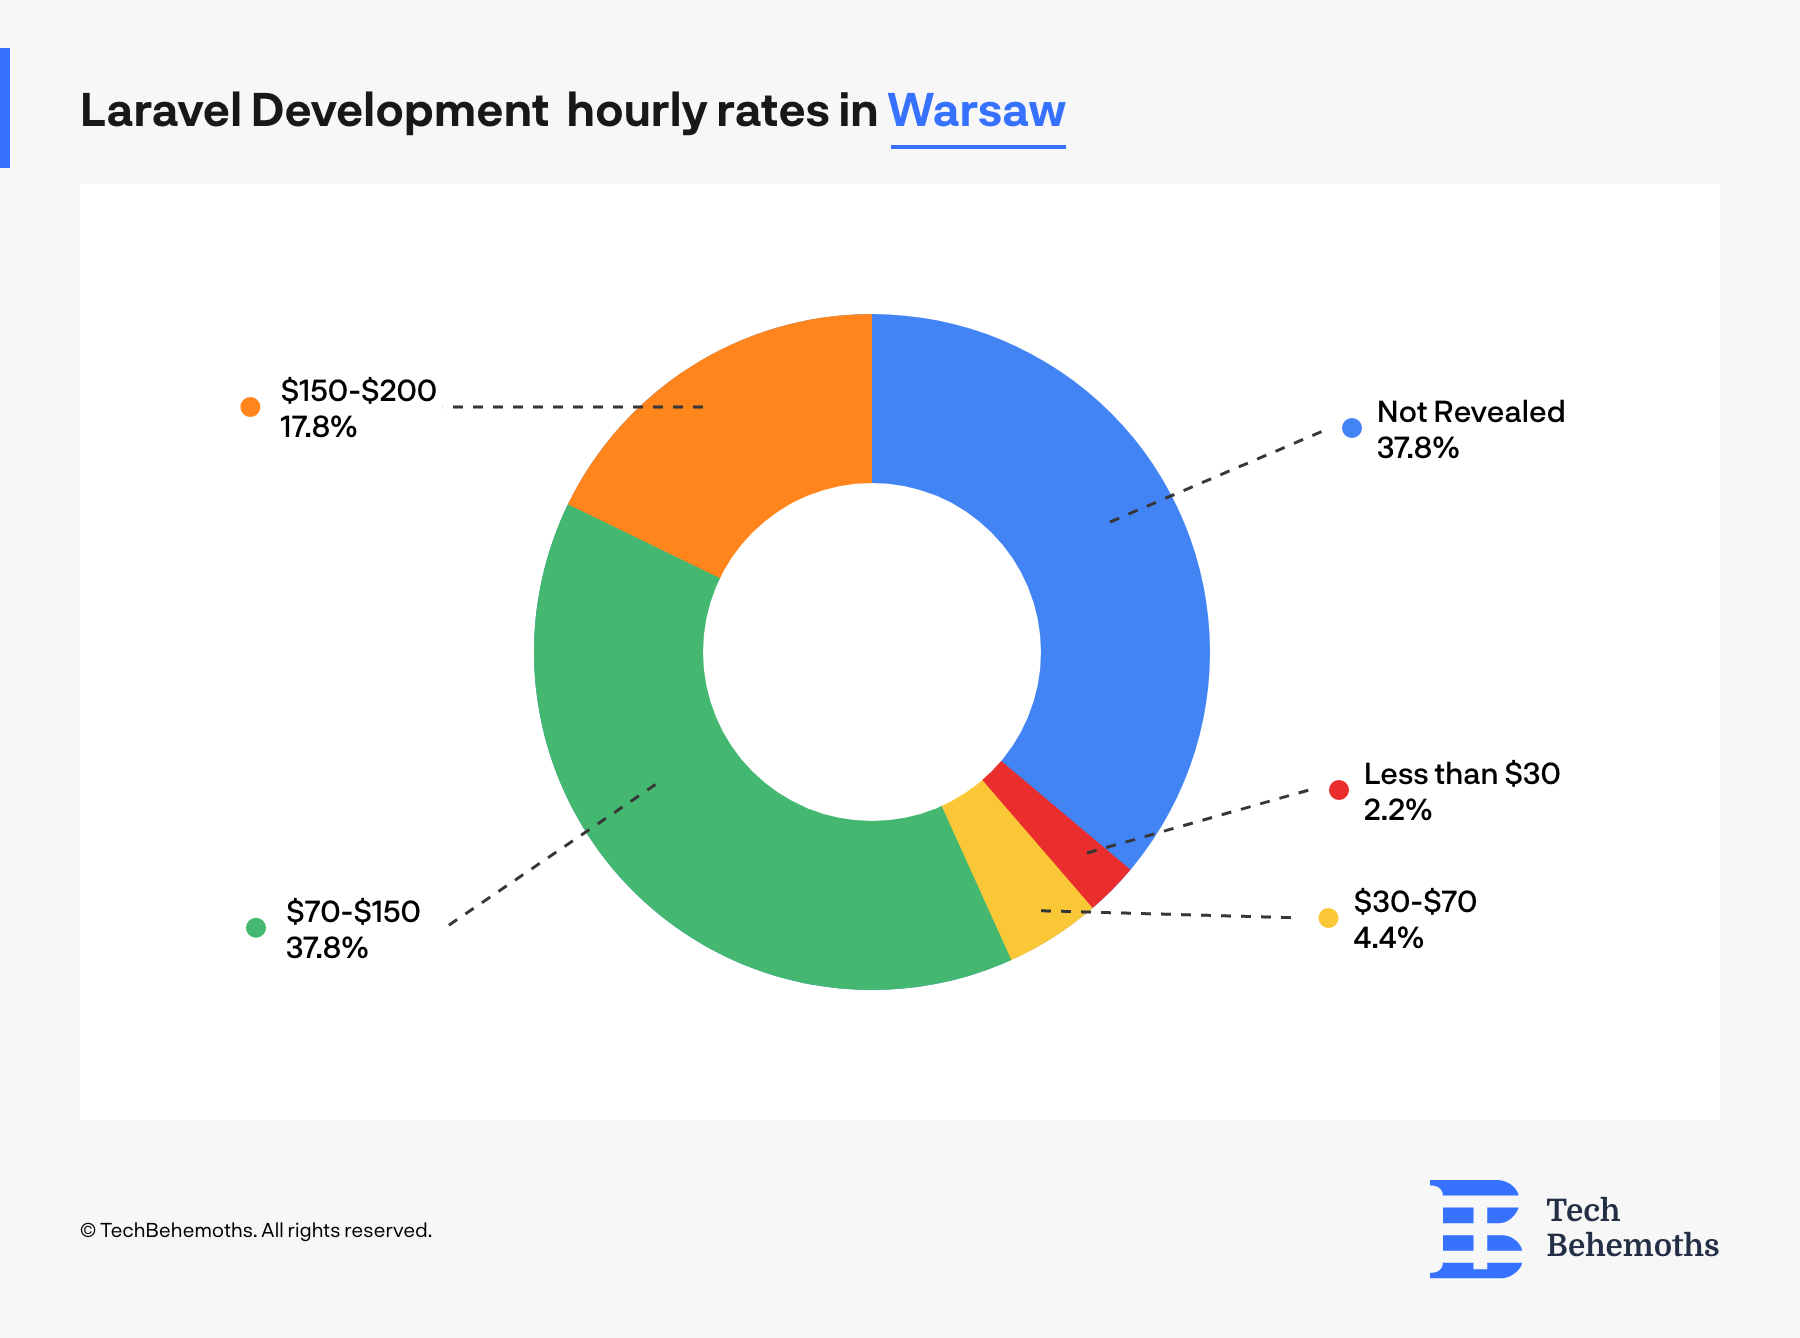 Hourly rates companies in warsaw have for developing in laravel